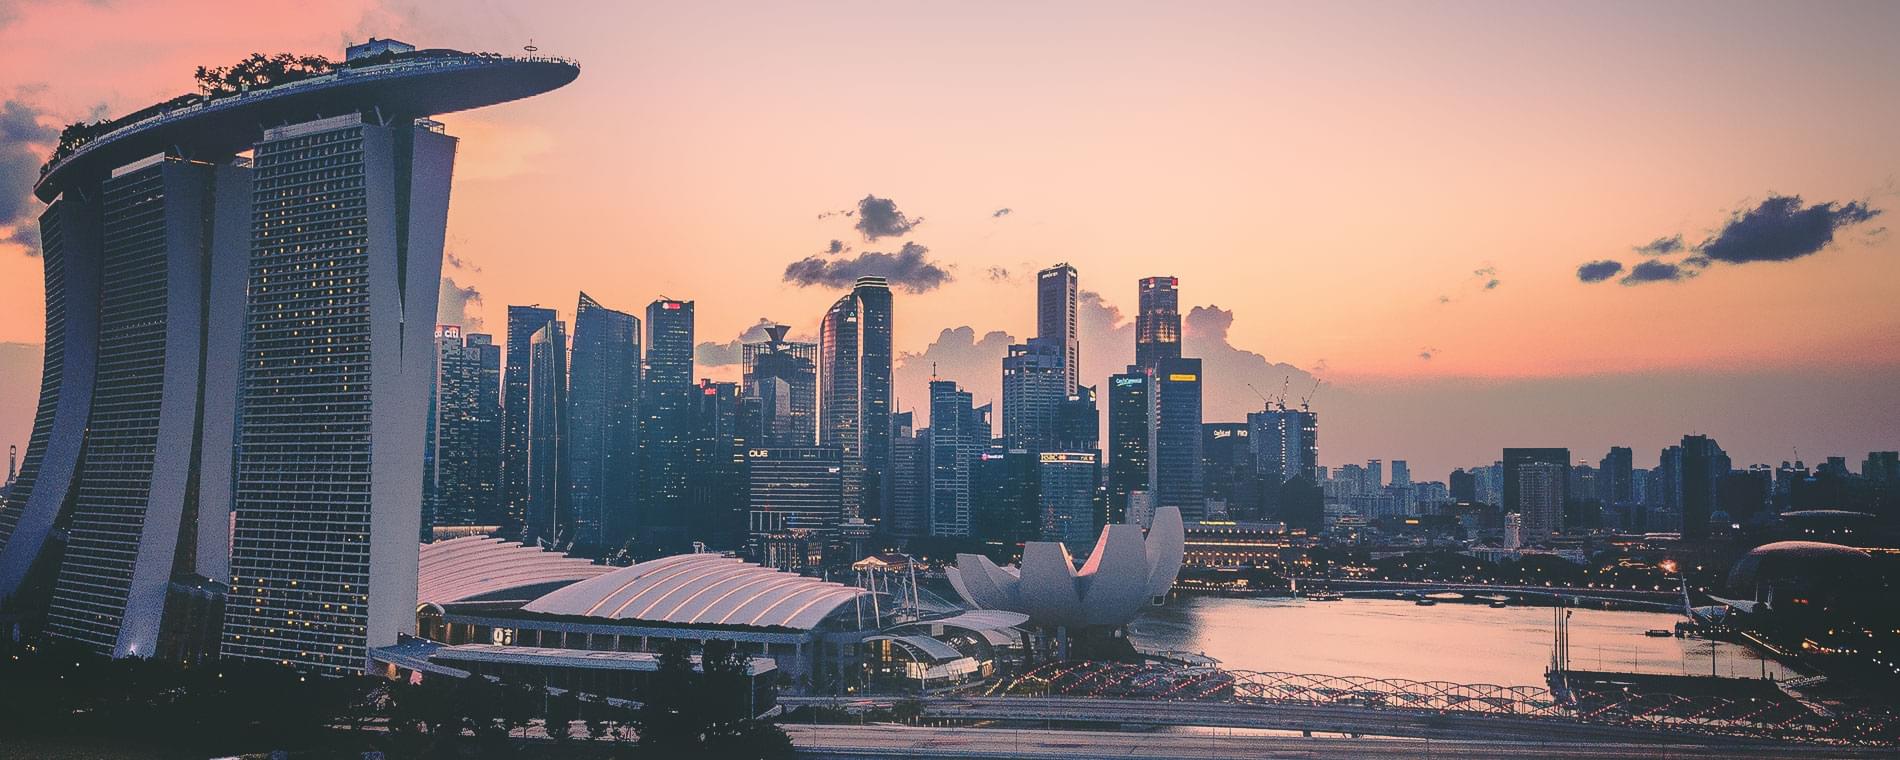 Singapore courts recognize crypto as property